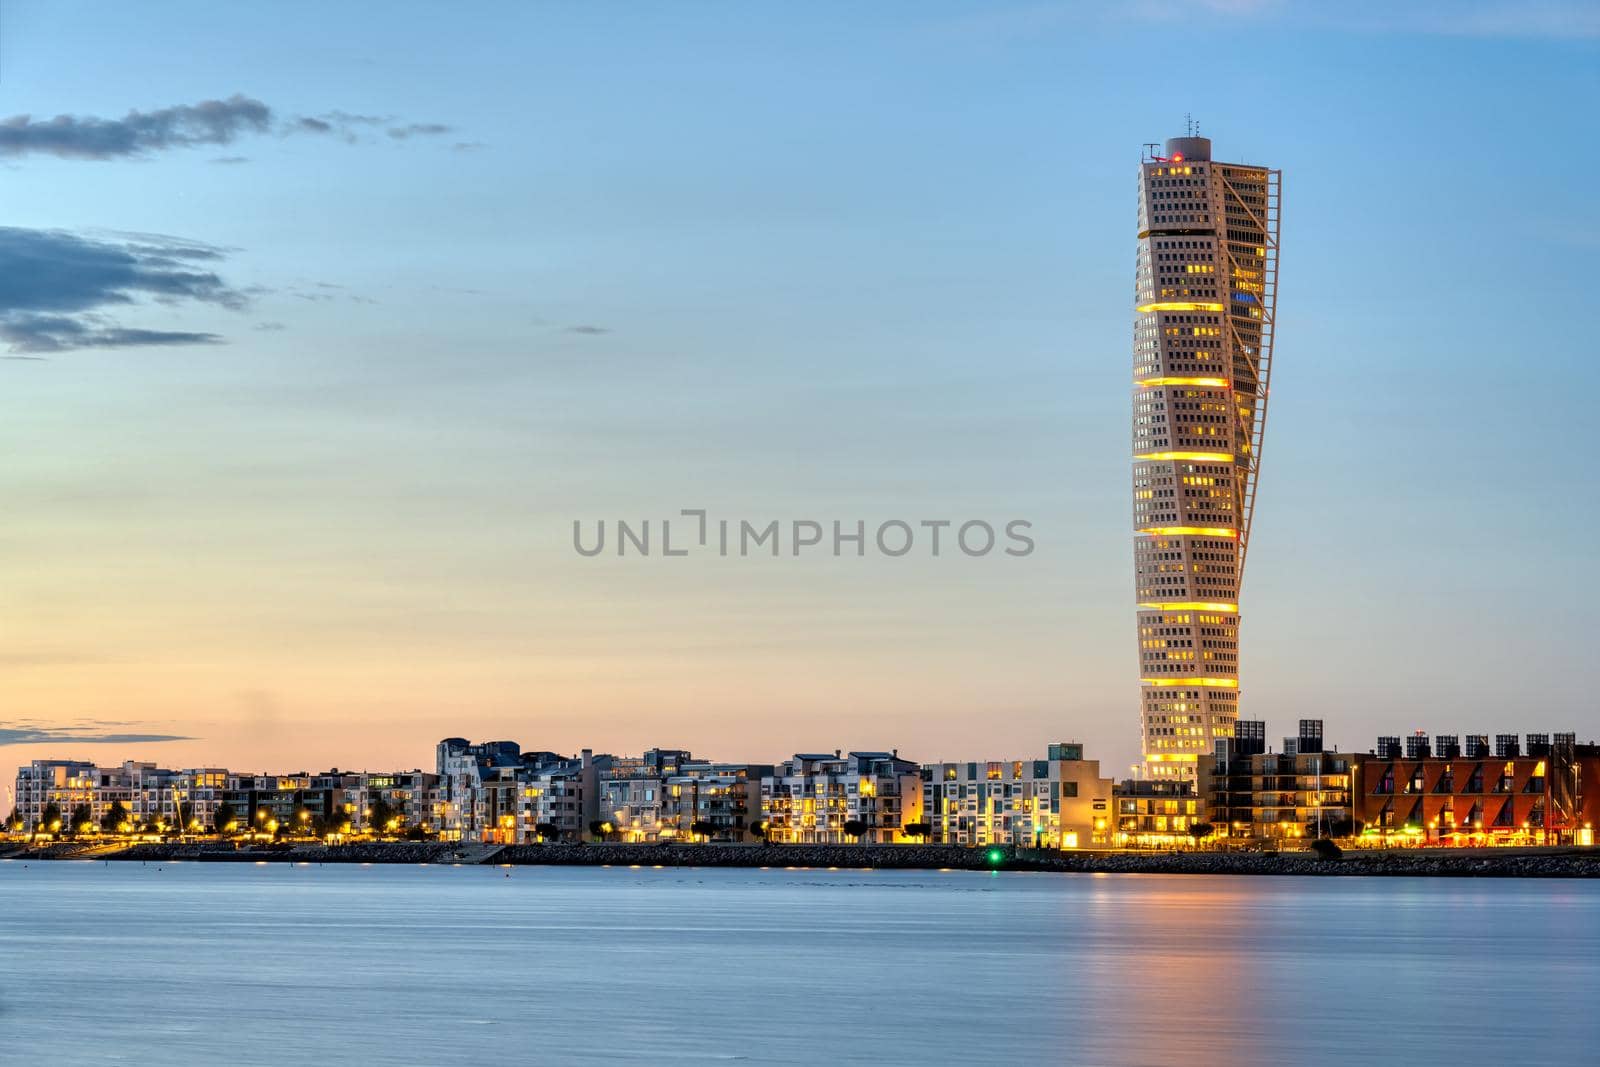 The Turning Torso in in Malmo, Sweden, at dusk